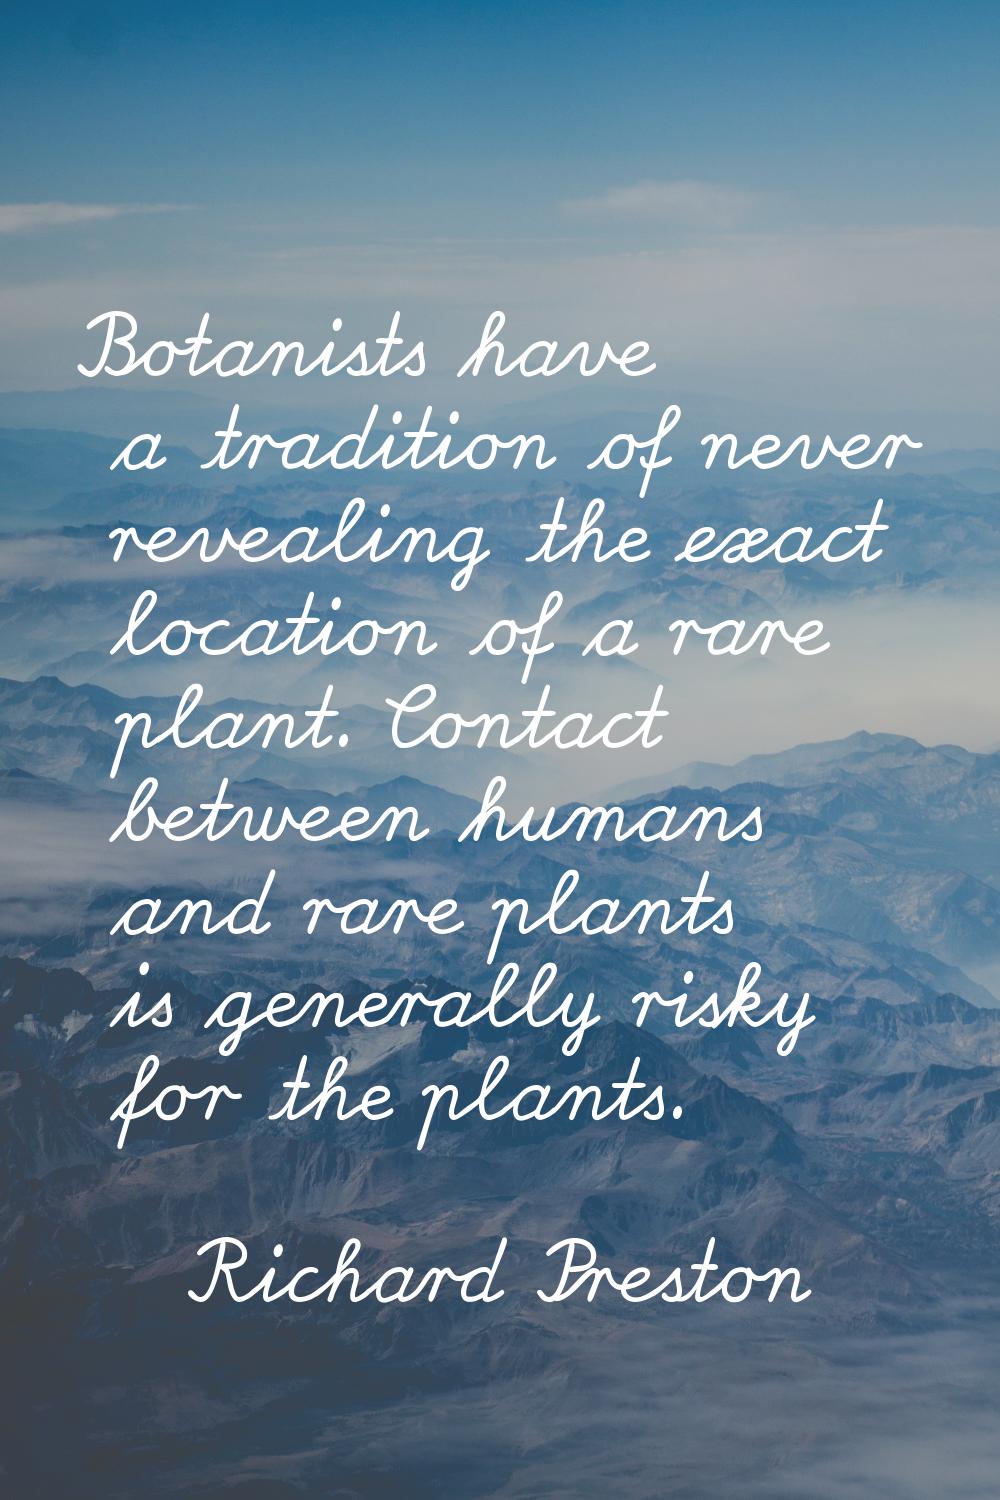 Botanists have a tradition of never revealing the exact location of a rare plant. Contact between h